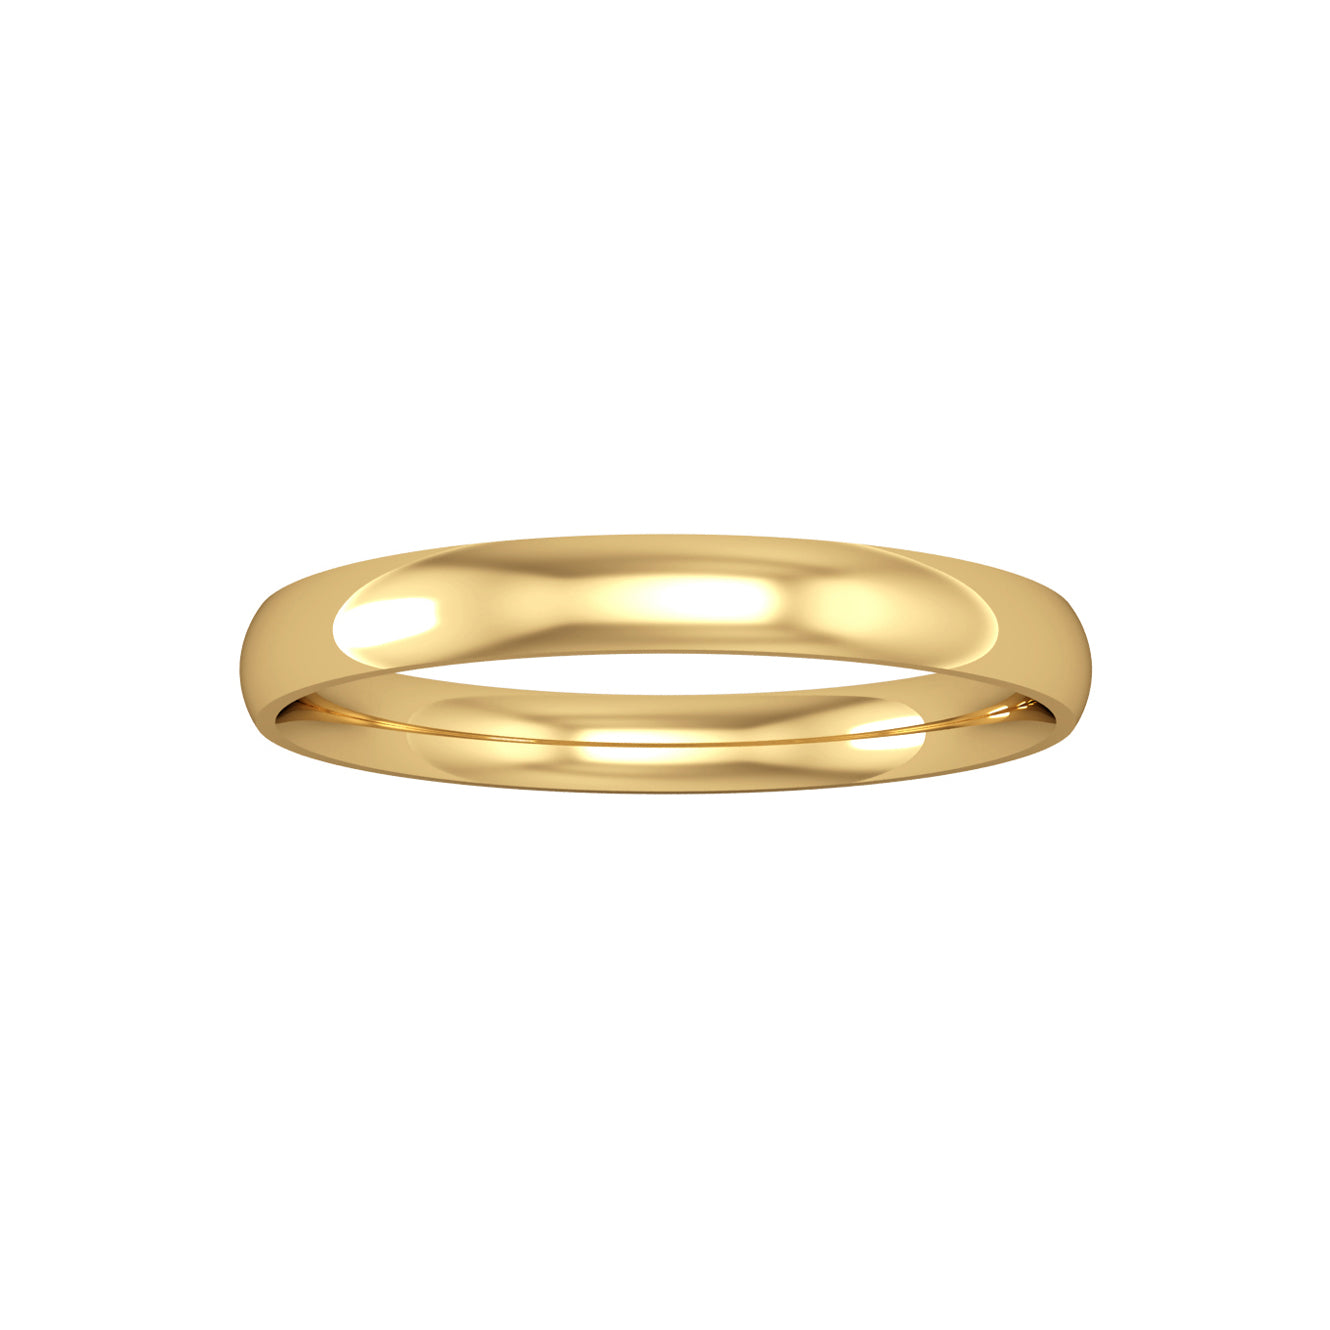 9ct Gold  2.5mm Light Court Wedding Band Commitment Ring - RNR0243BL